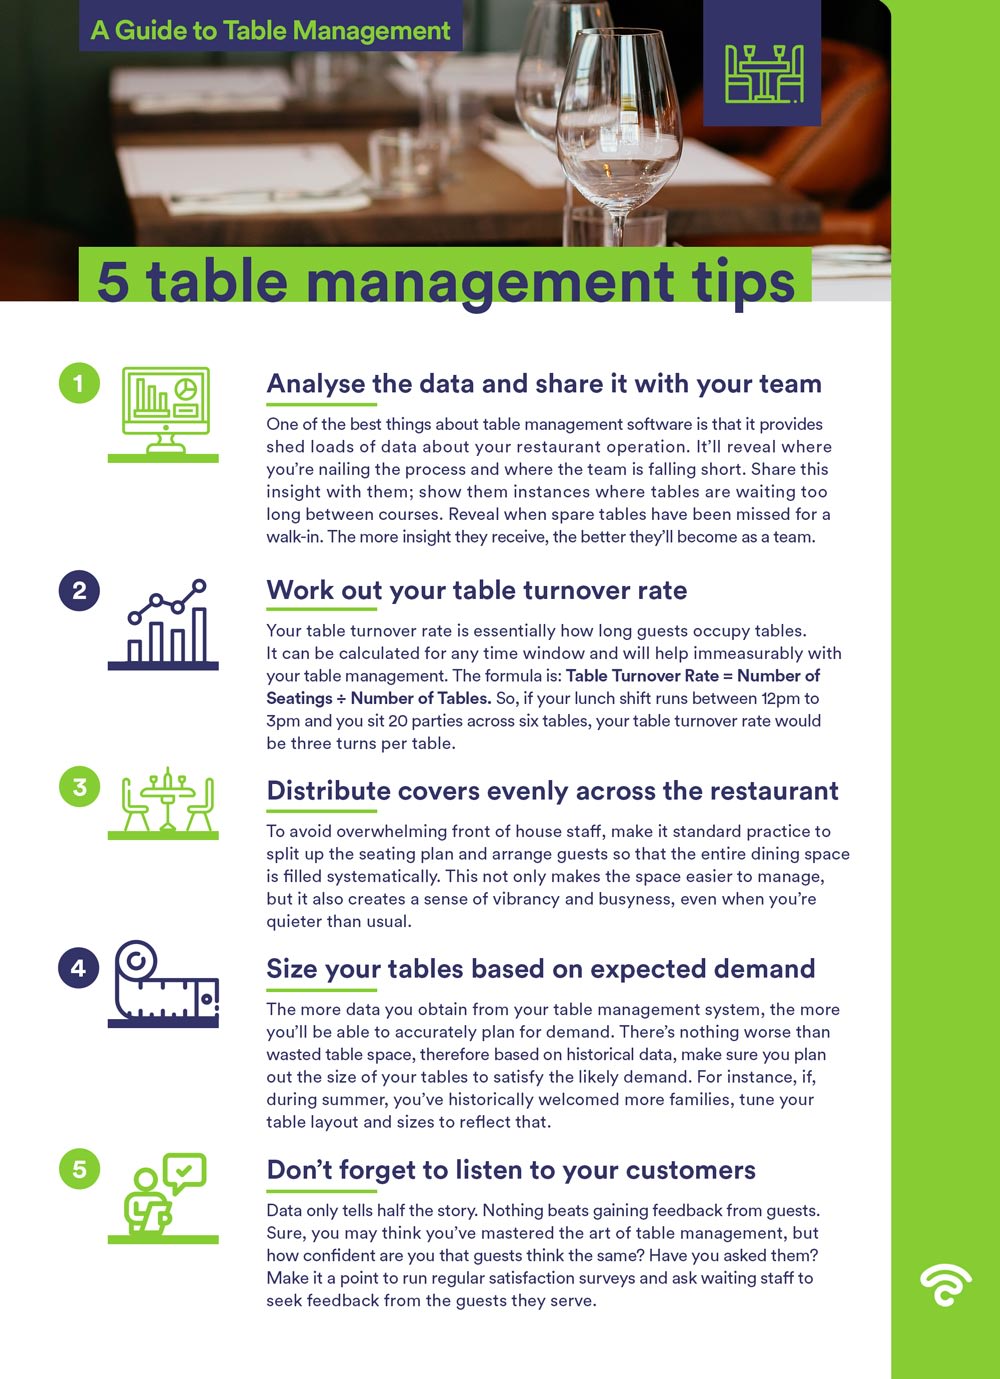 5-table-management-tips